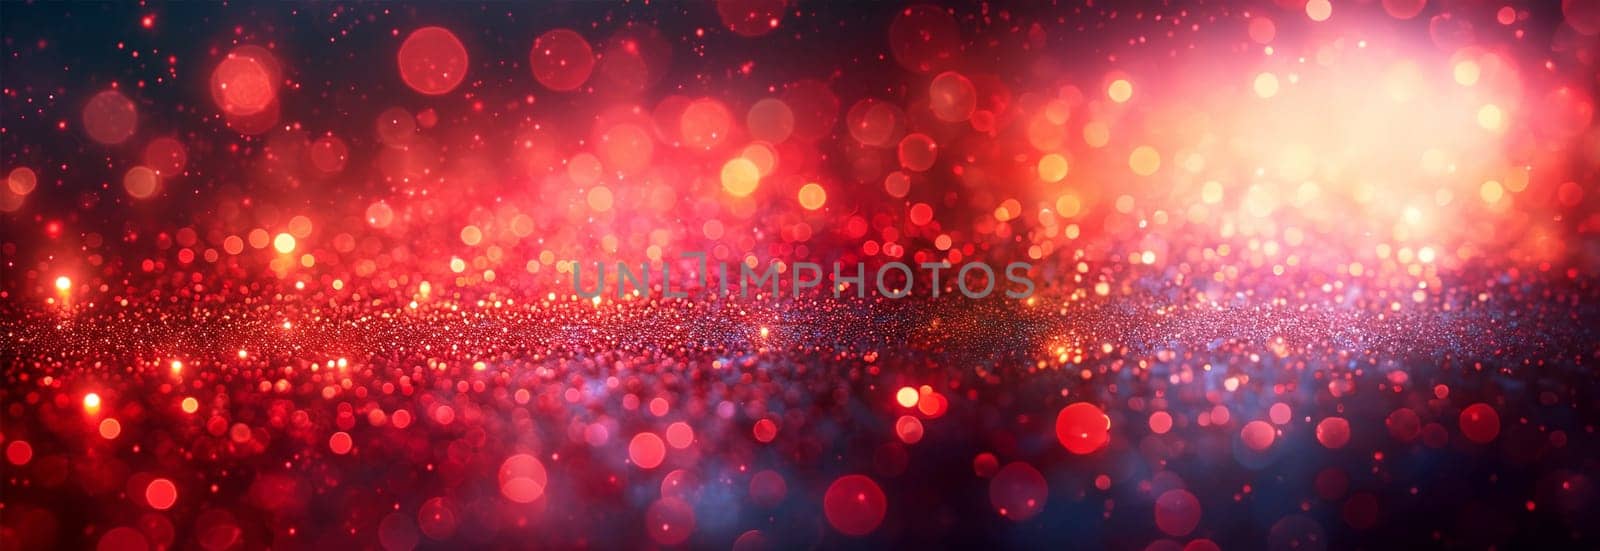 Banner Gold and red particles waves glittering. Red sparkles glitter and rays lights bokeh abstract holiday background texture. Festive abstract design web banner